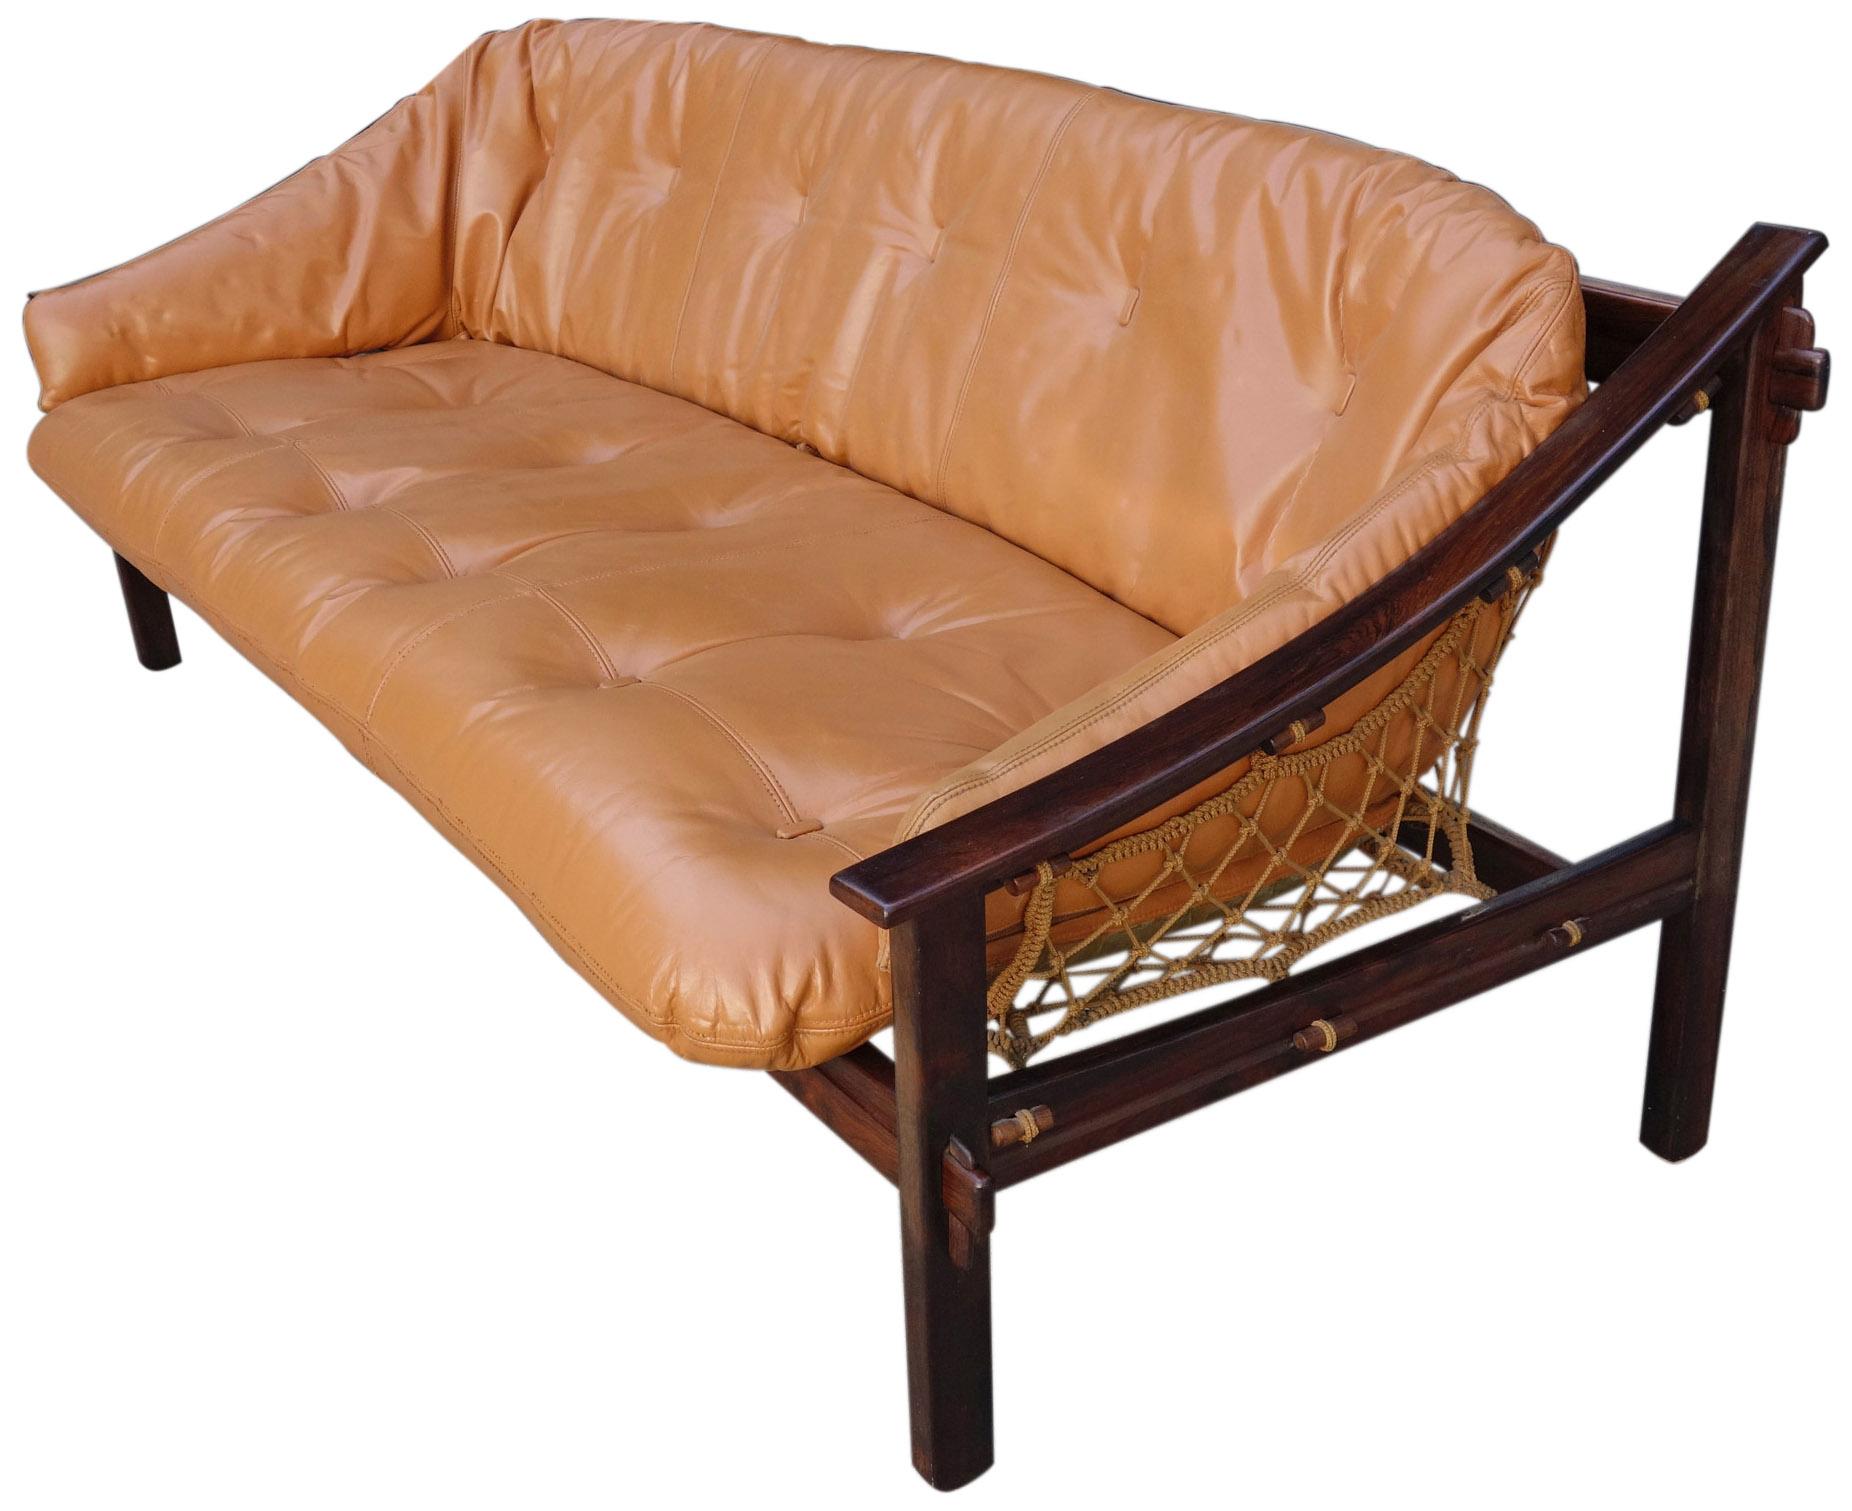 Pure Brazilian midcentury. Featuring a solid Brazilian rosewood frame and netted rope inspired by local fisherman. This sofa has a sleek design that look spectacular from any angle. This item is in original condition with the leather having been